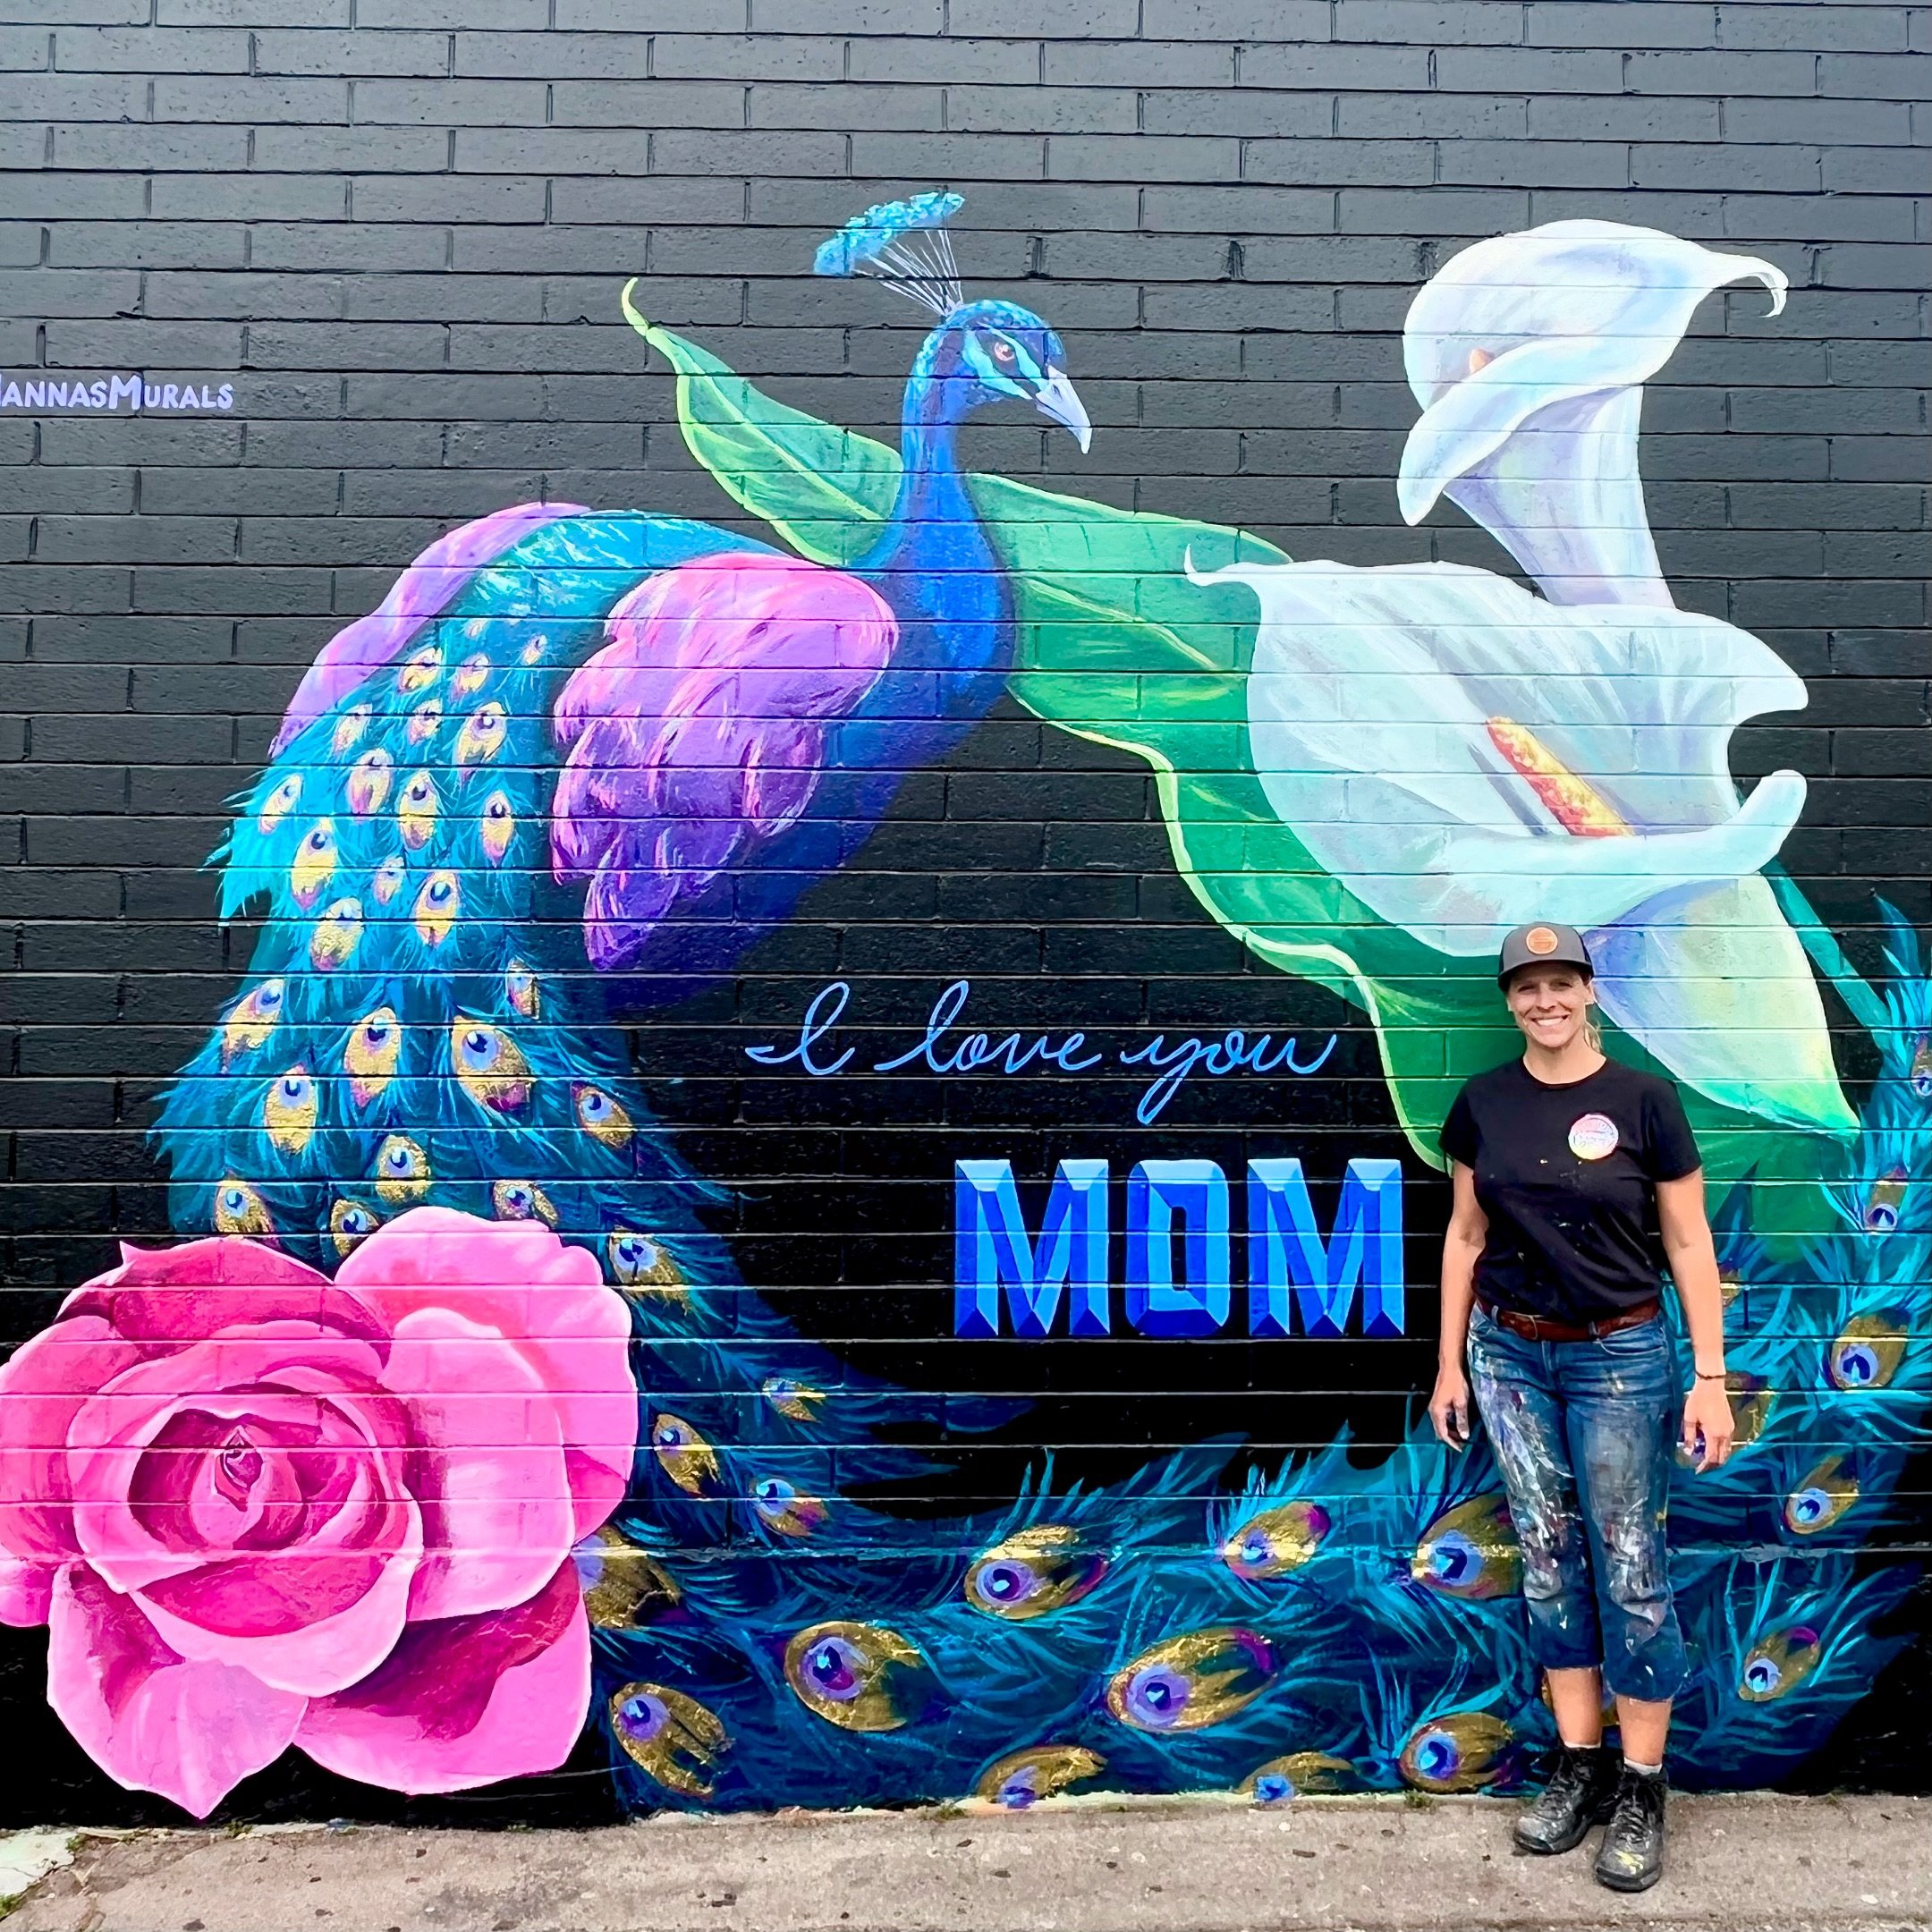 I painted this mural in 2022 for all the people who have lost their moms. 

I know that Mother&rsquo;s Day can be a difficult time. I lost my mom in 2021, and that first Mother&rsquo;s Day without her was really tough. 

I dedicated this mural to her